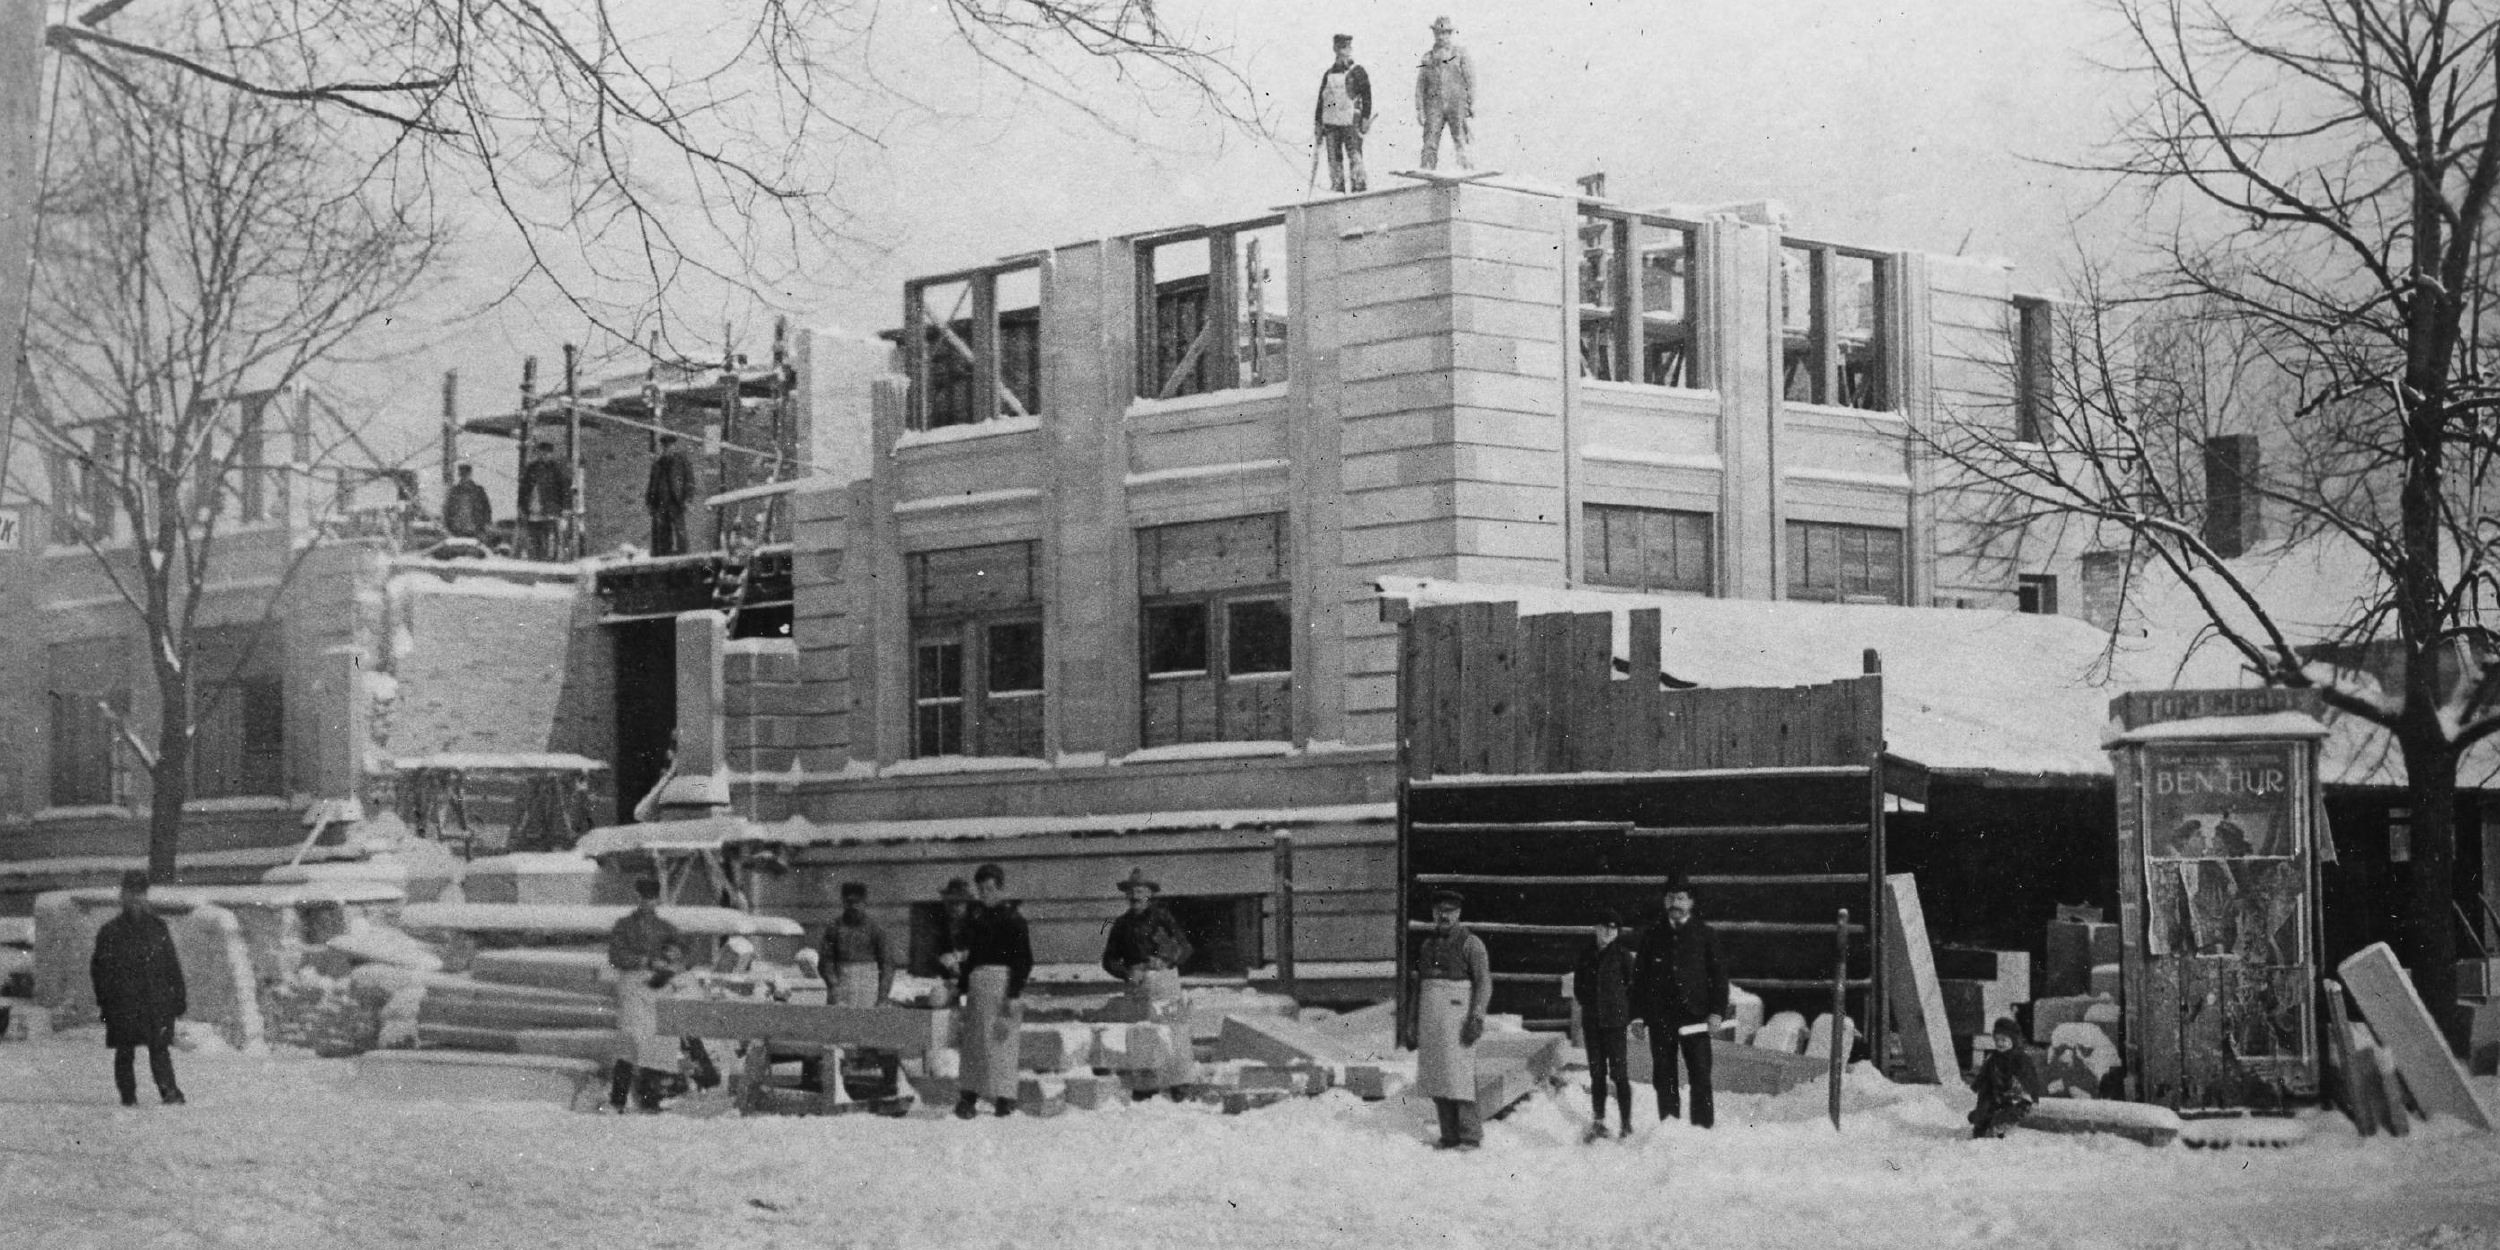 A photo of construction workers working on the library building in 1903.